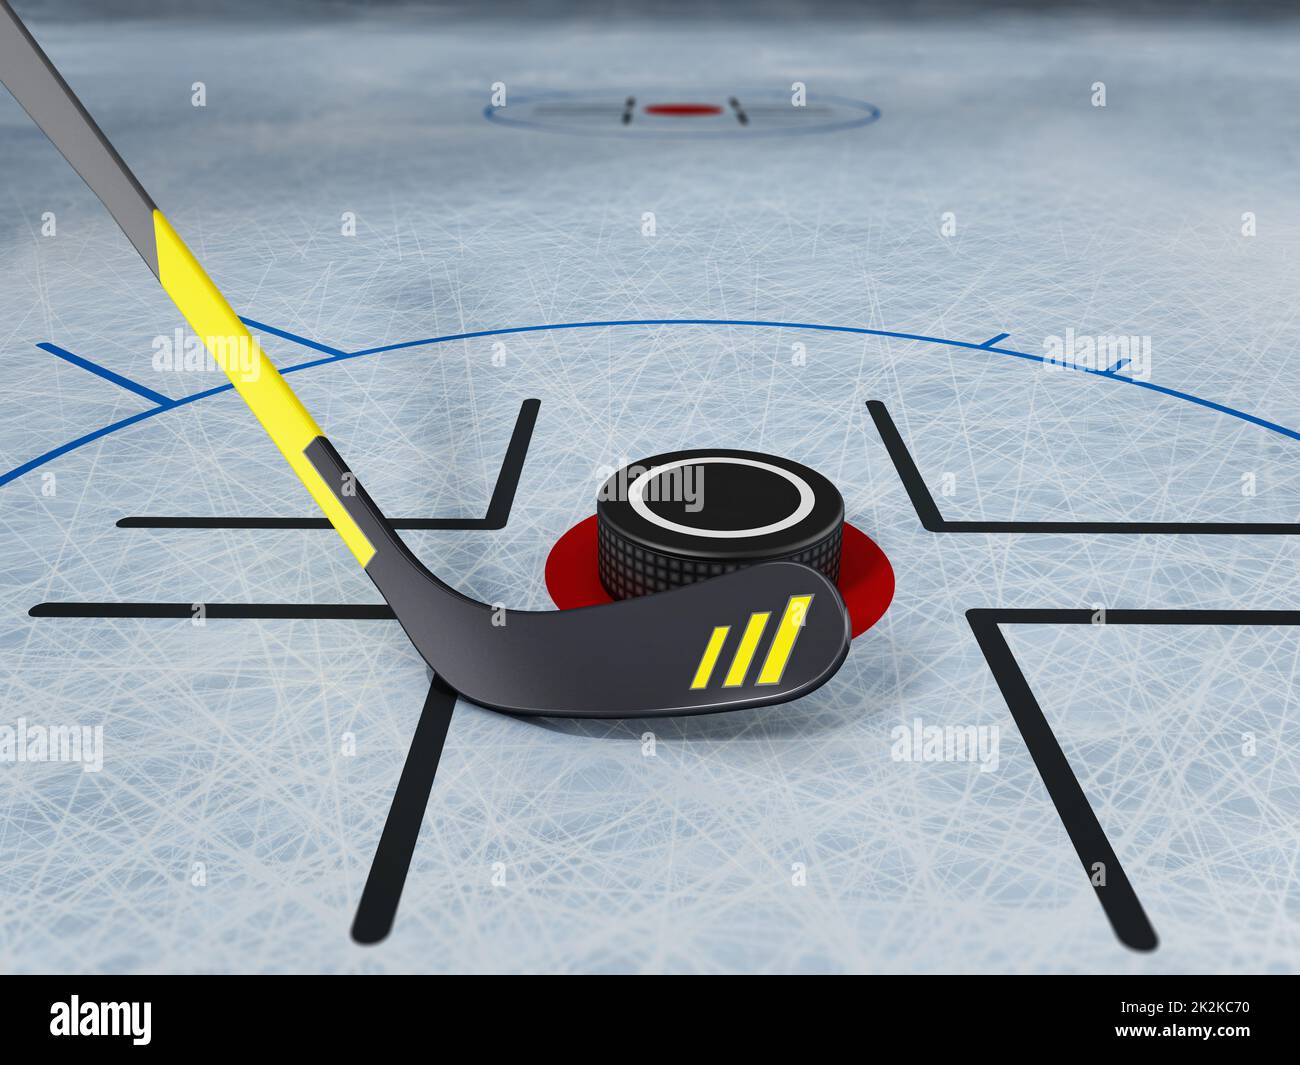 Hockey stick and puck in a cloud of ice chips stock photo - OFFSET